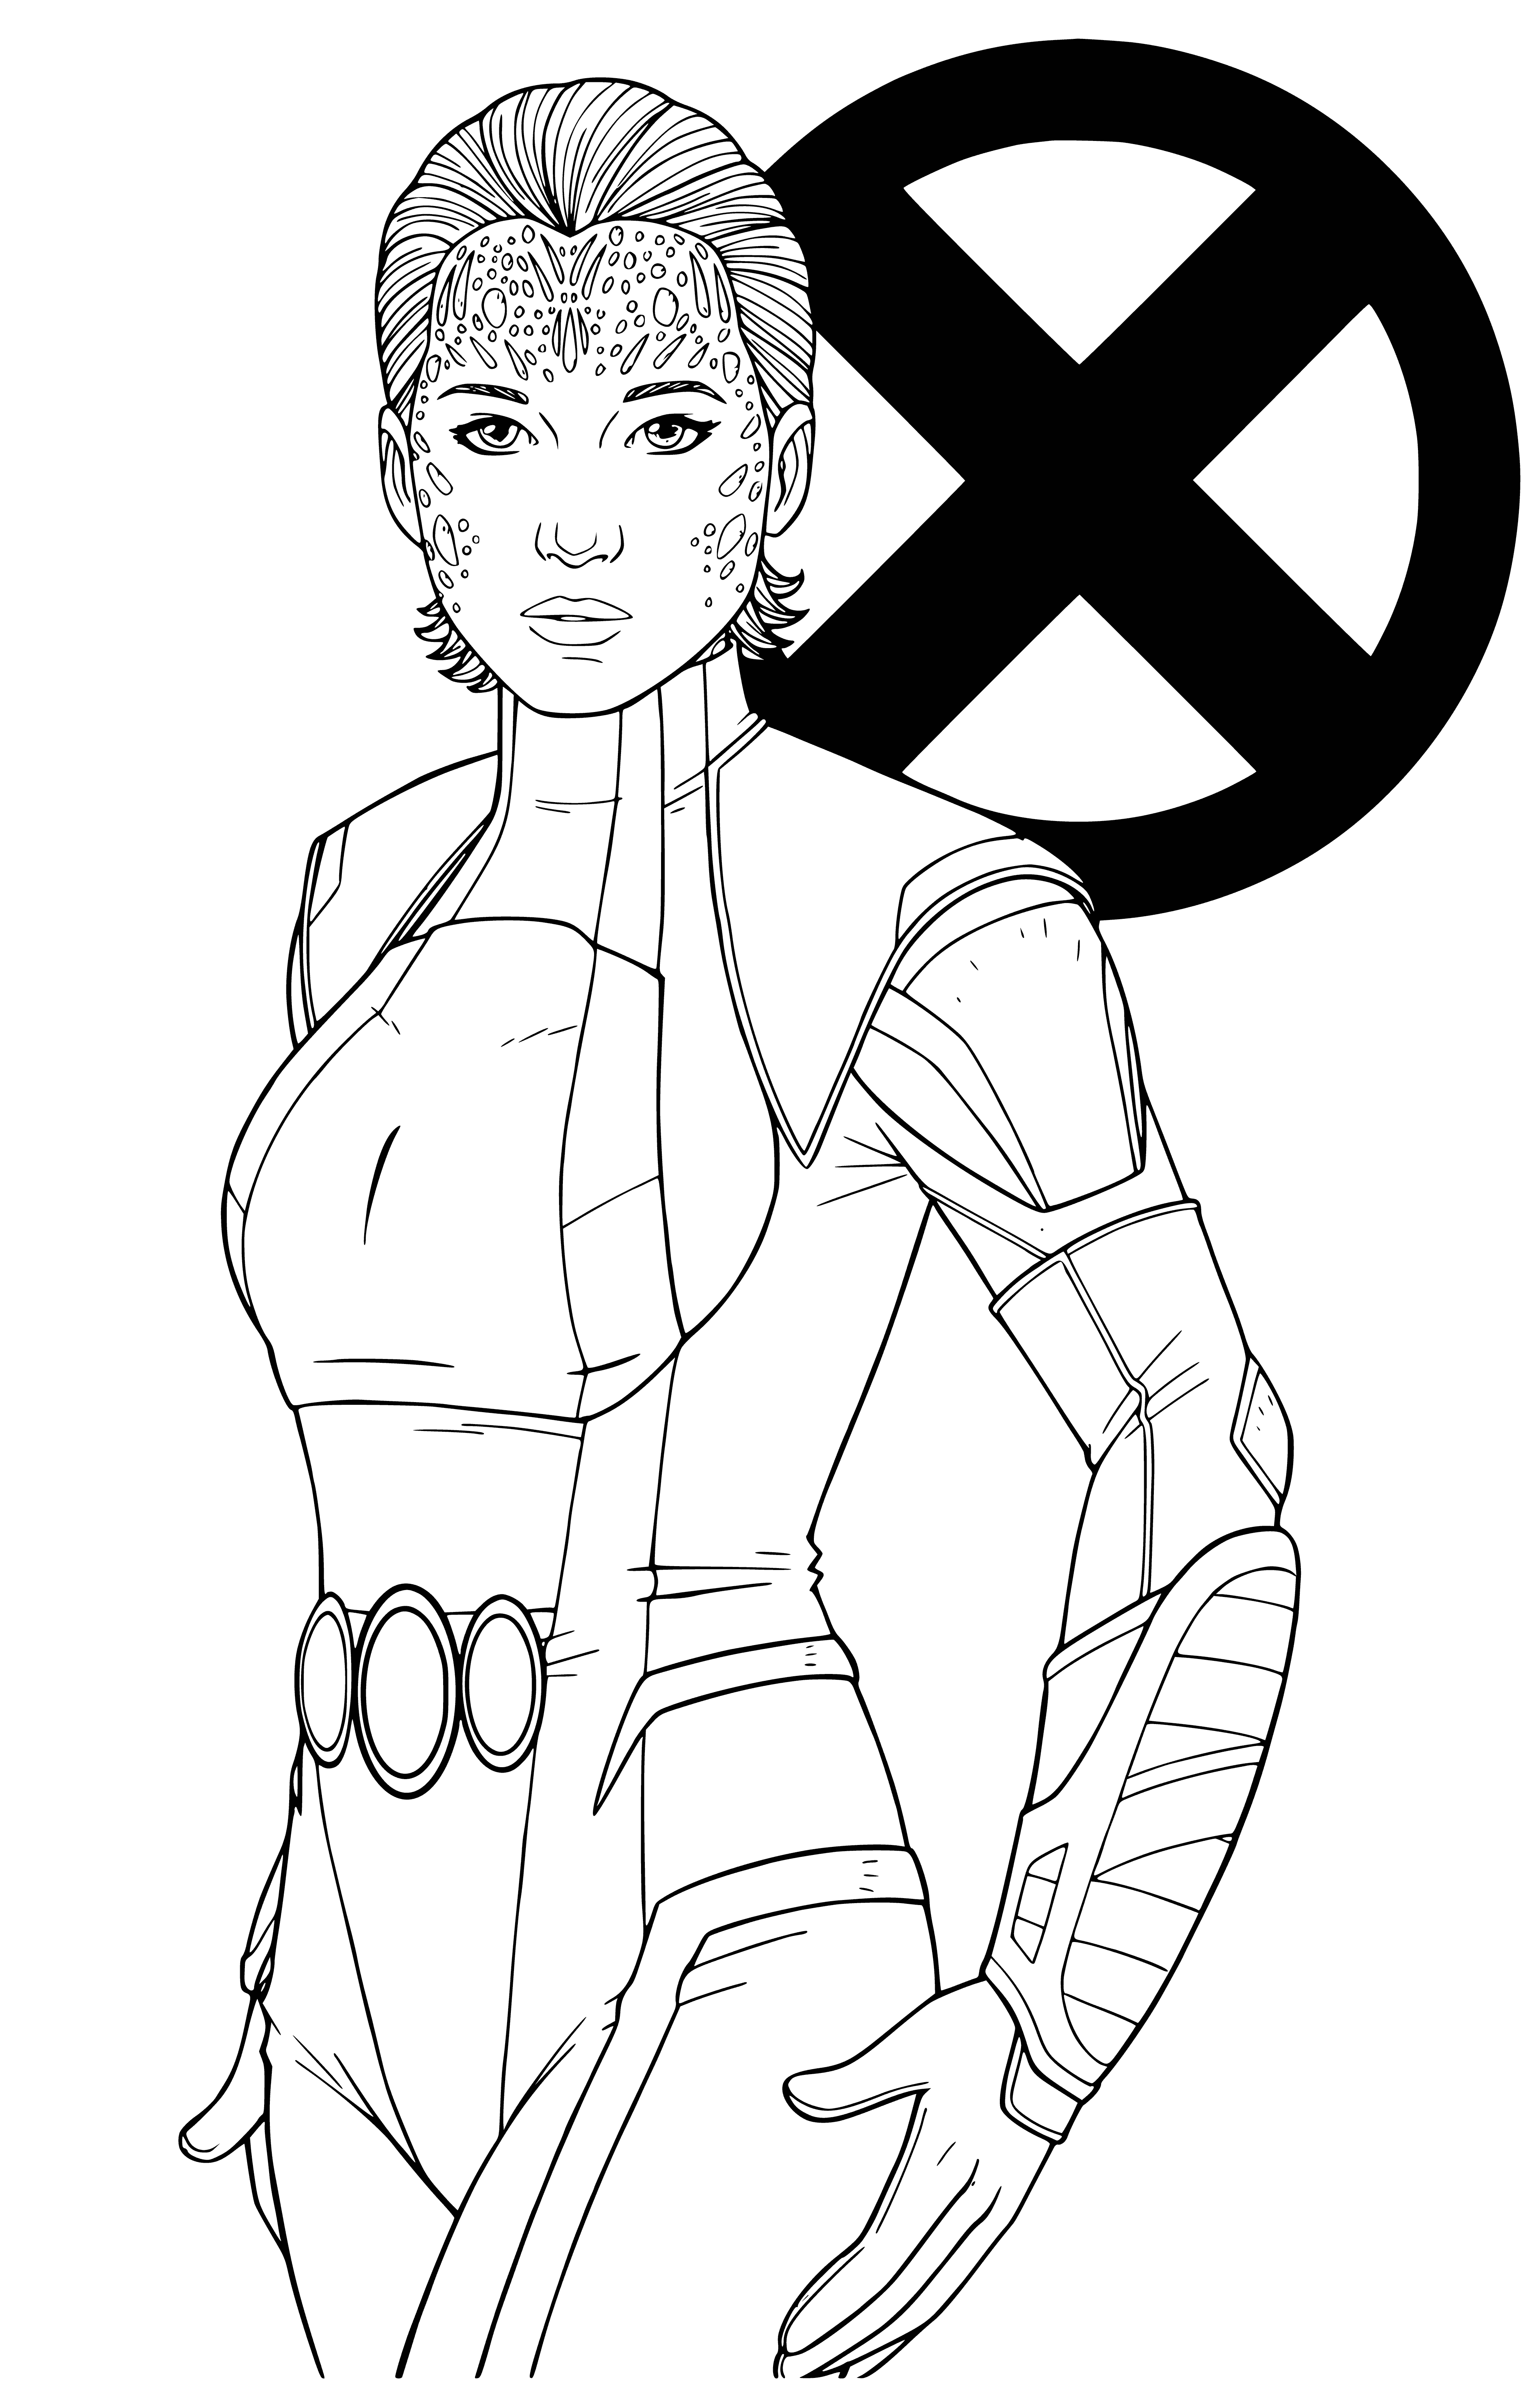 coloring page: Mystic is a powerful superhero who battles evil with her magic, martial arts and illusions. She has a distinctive dark blue costume featuring a gold cape and crescent moon symbol.